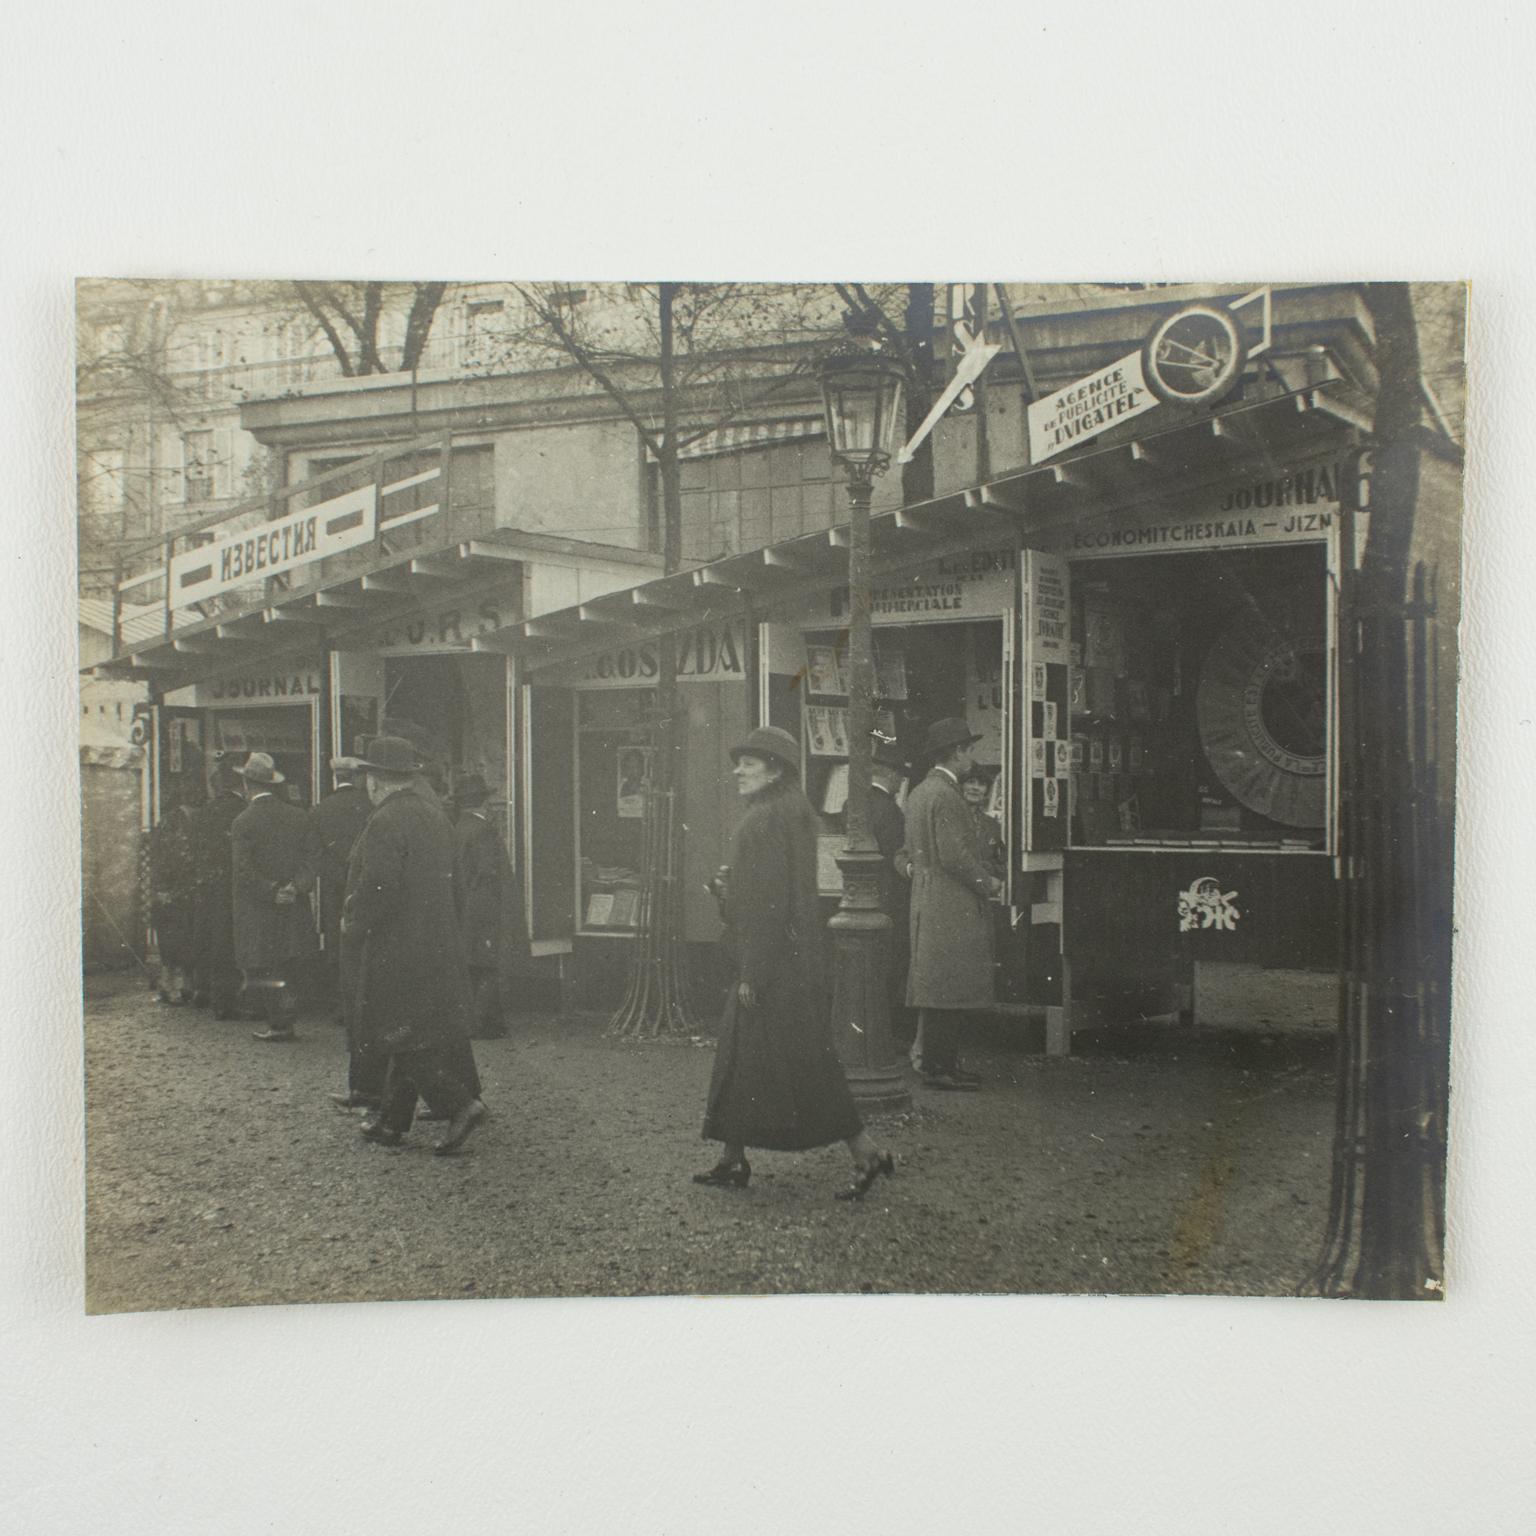 Paris Decorative Art Exhibition and Russian Pavilion, 1925, B and W Photography For Sale 1